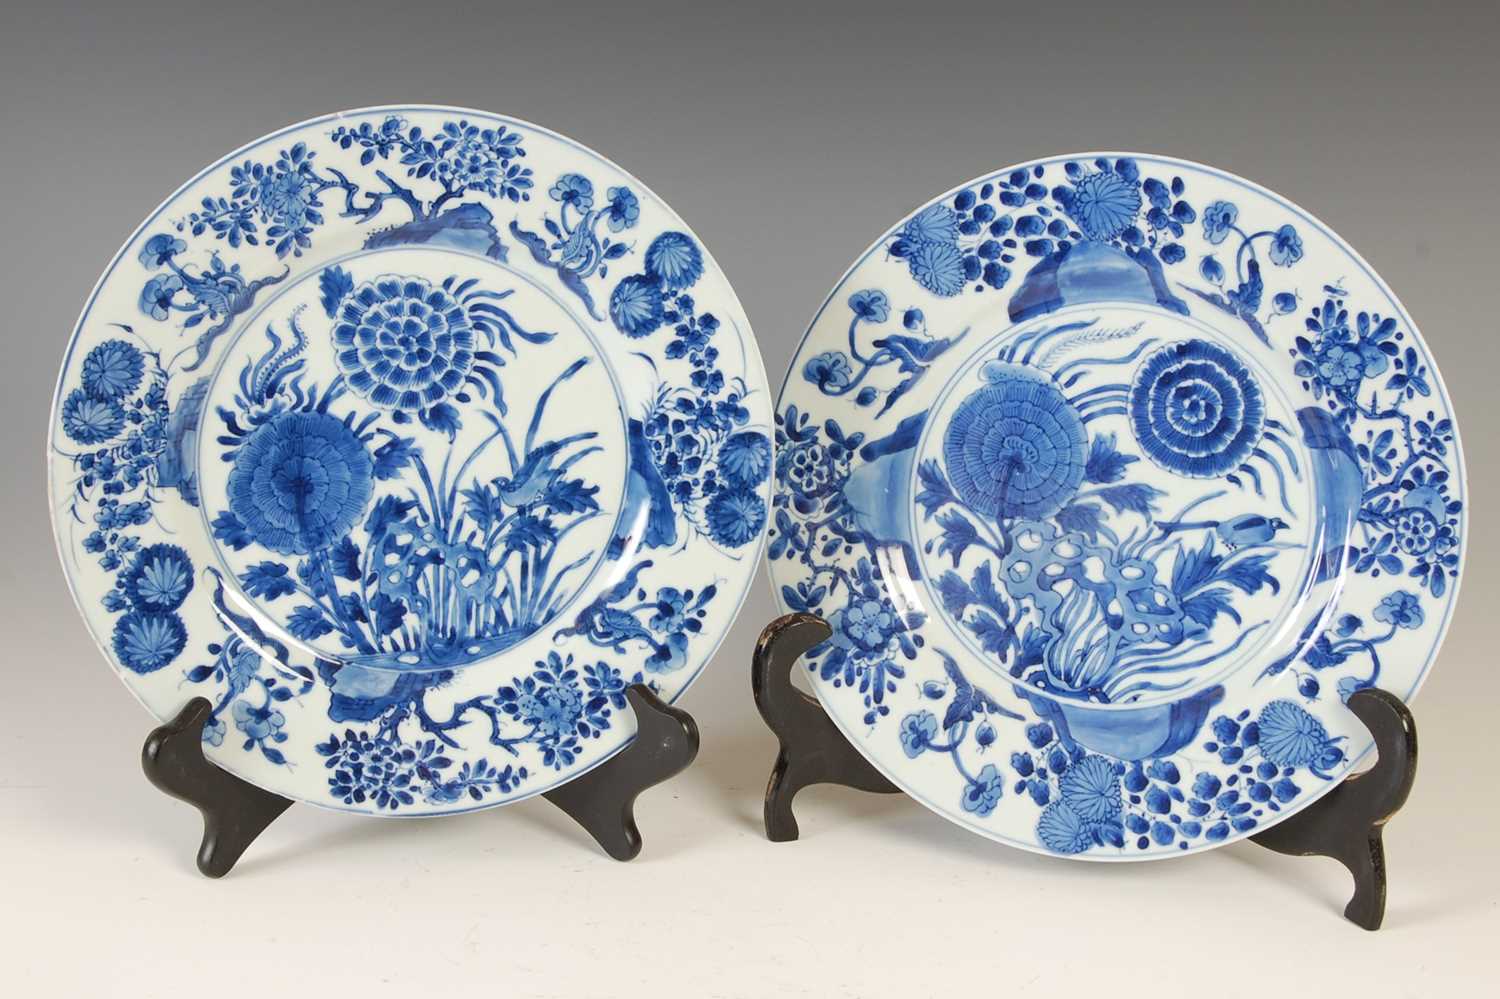 A pair of Chinese porcelain blue and white plates, Qing Dynasty, decorated with circular panels of